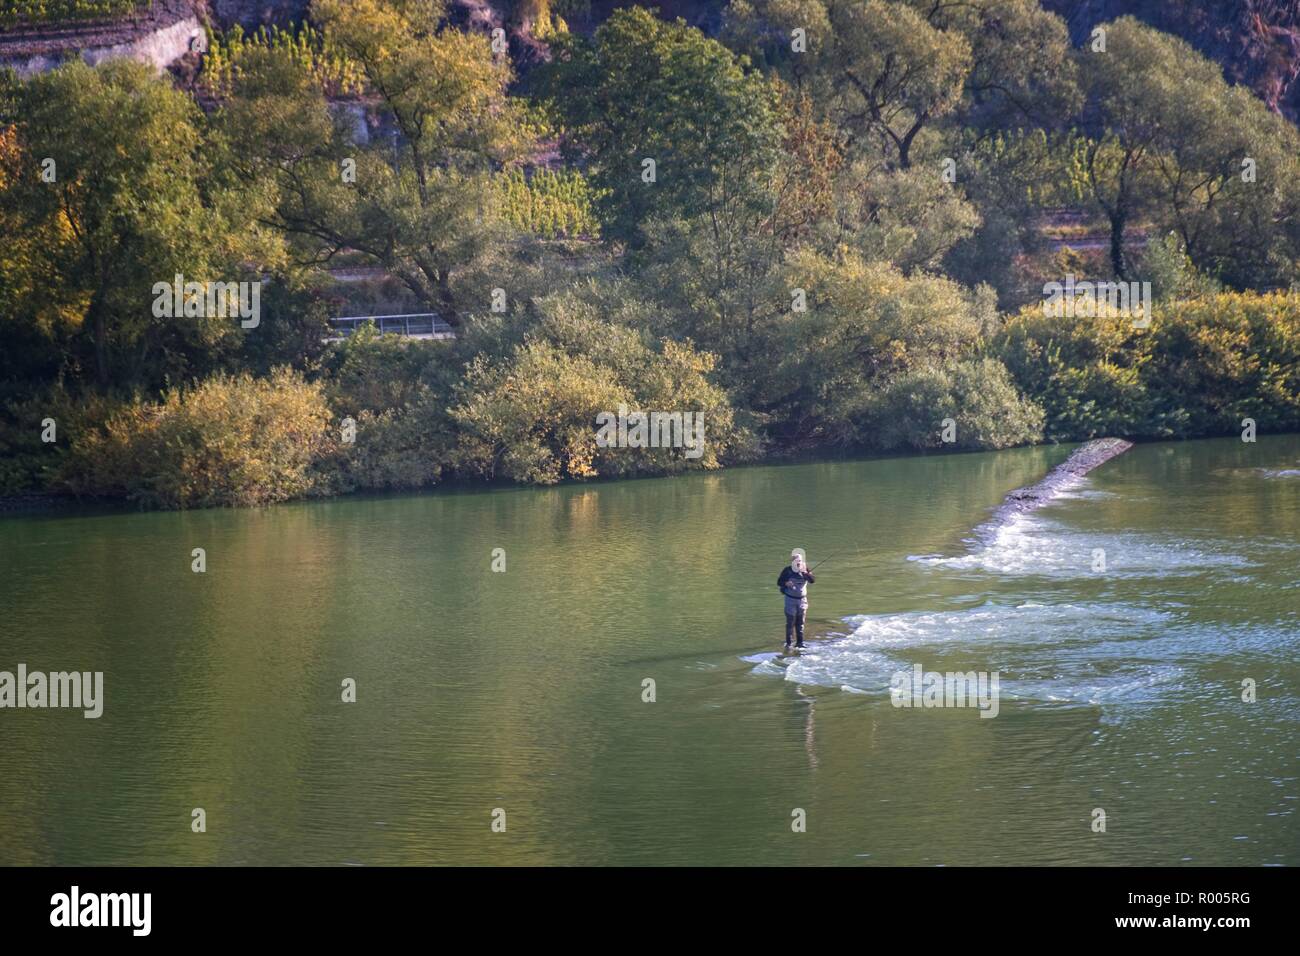 WINNINGEN FISHERMAN ON WEIR THE RIVER MOSEL VALLEY GERMANY Stock Photo